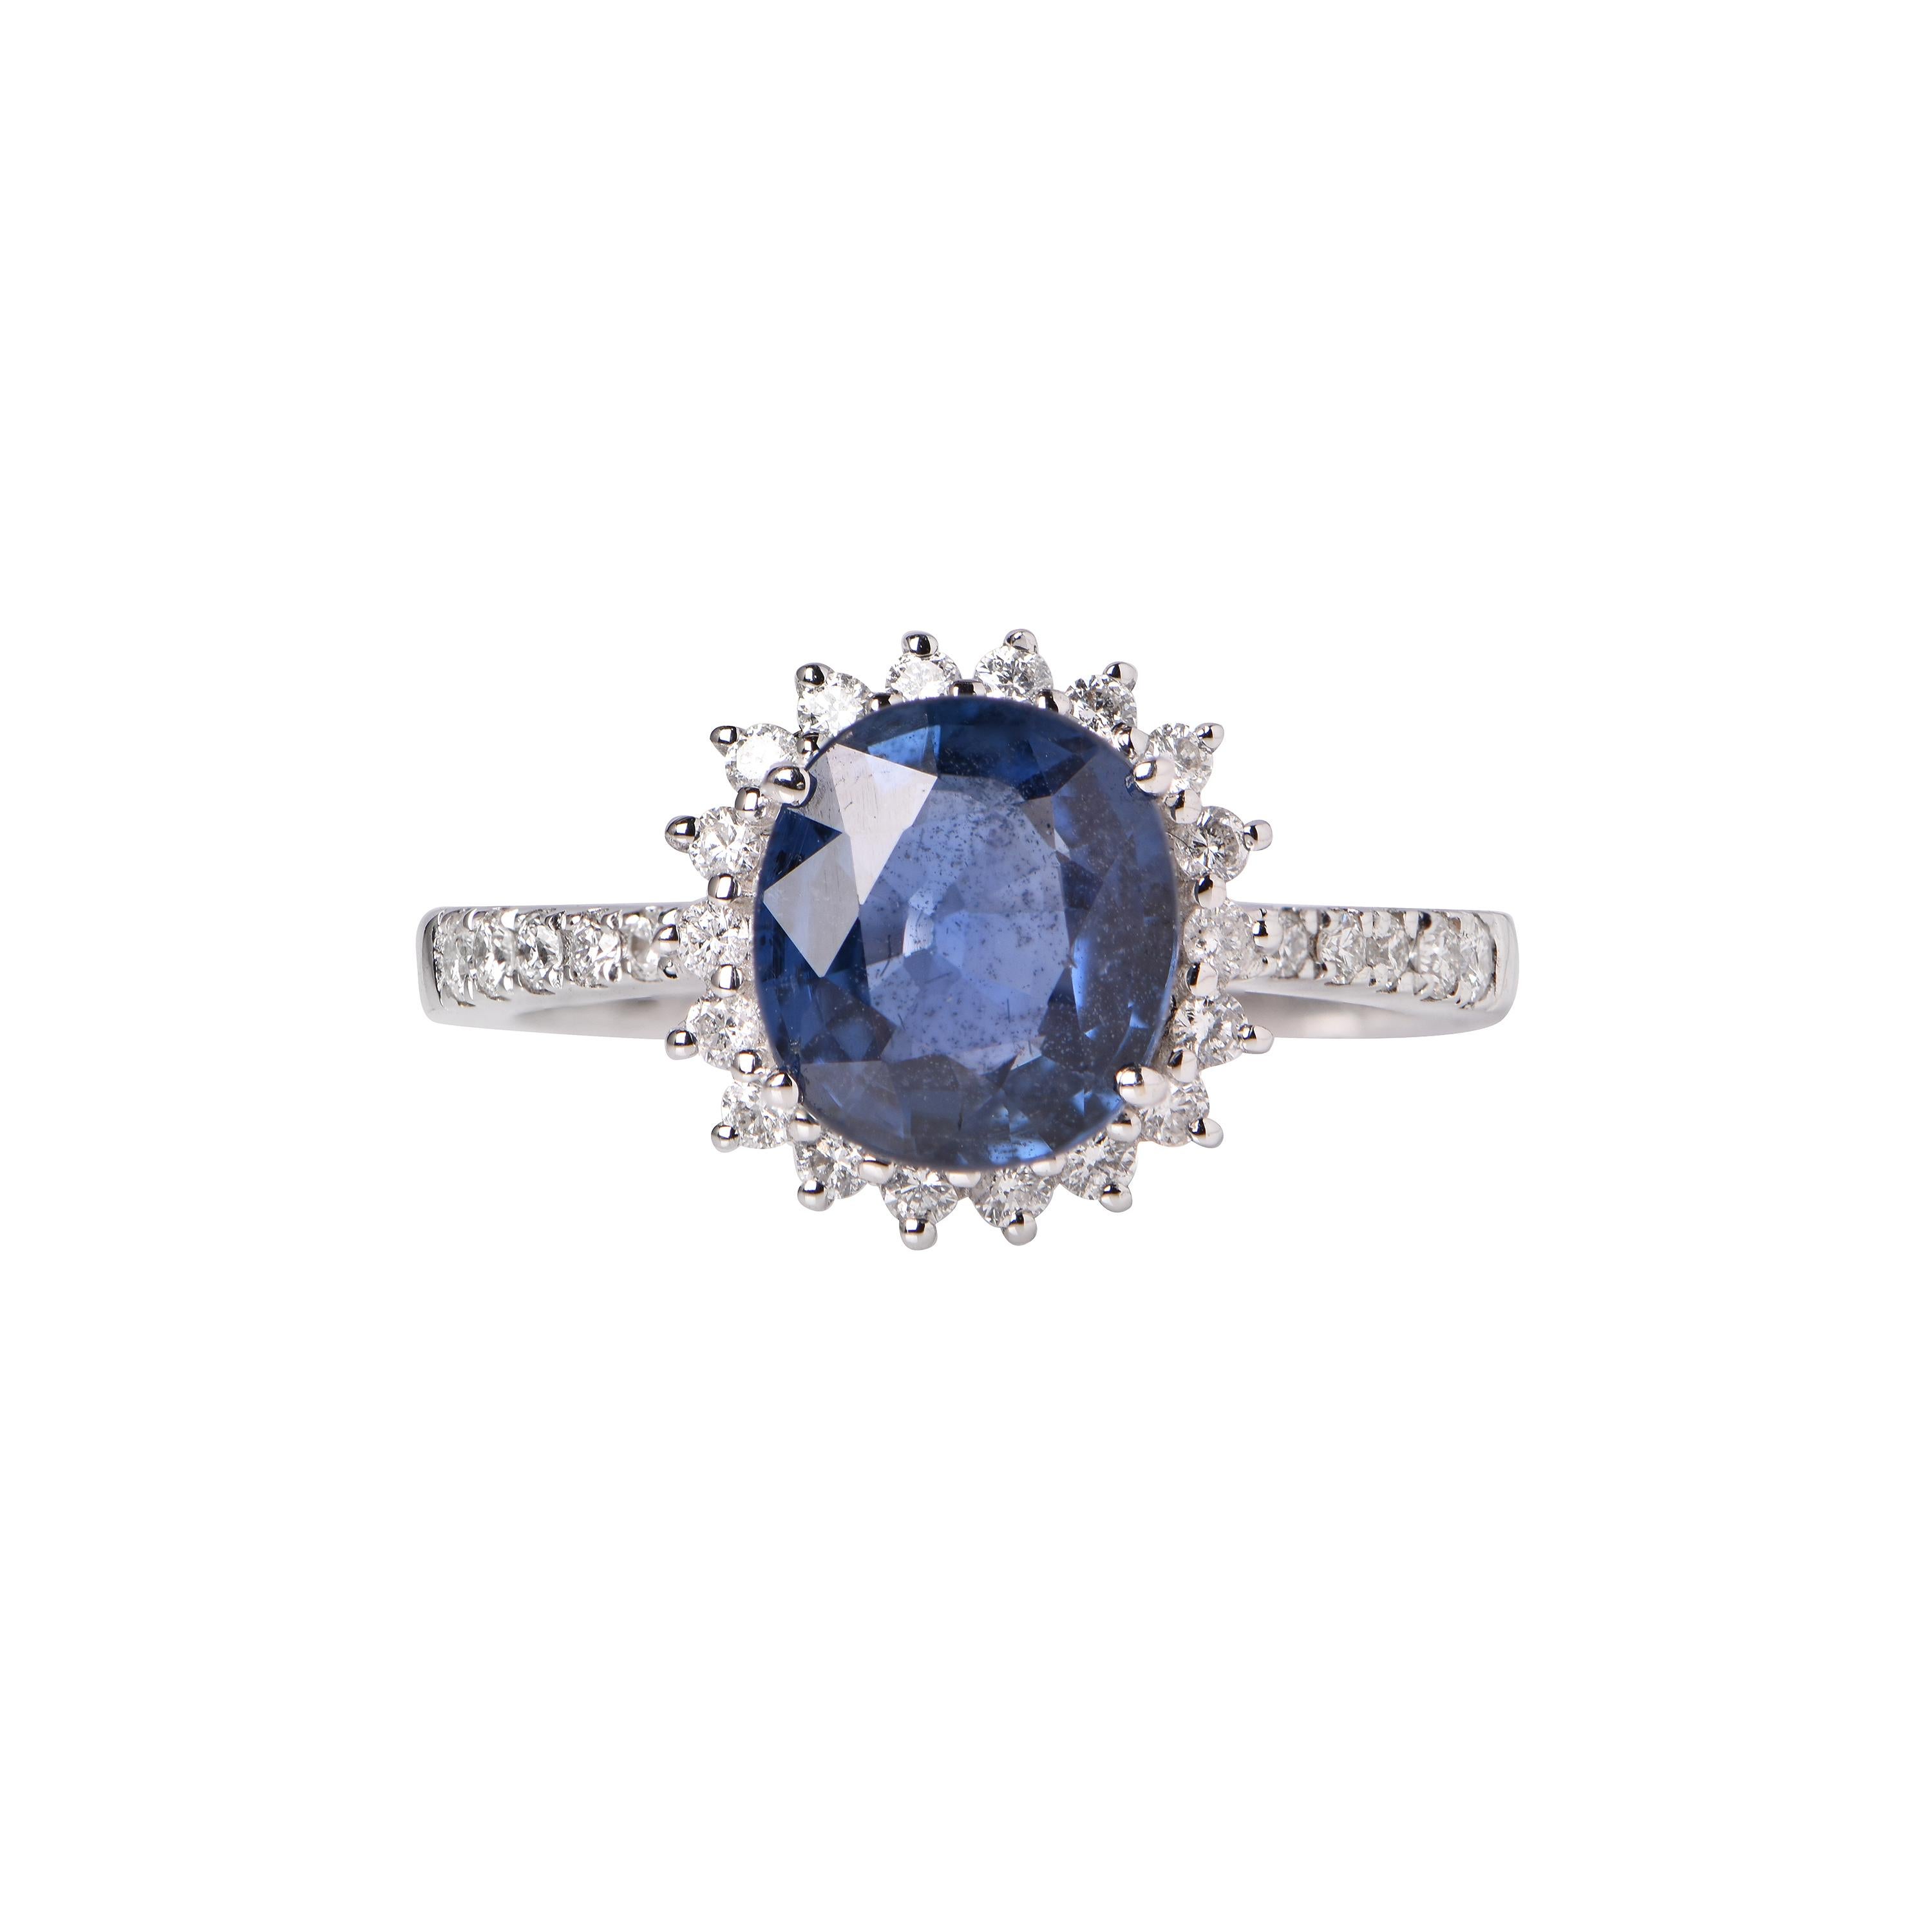 An 18ct White Gold ring showcasing a Sapphire (2.47ct), and 28 Diamonds totalling 0.31ct. This ring comes with a valuation certificate.
